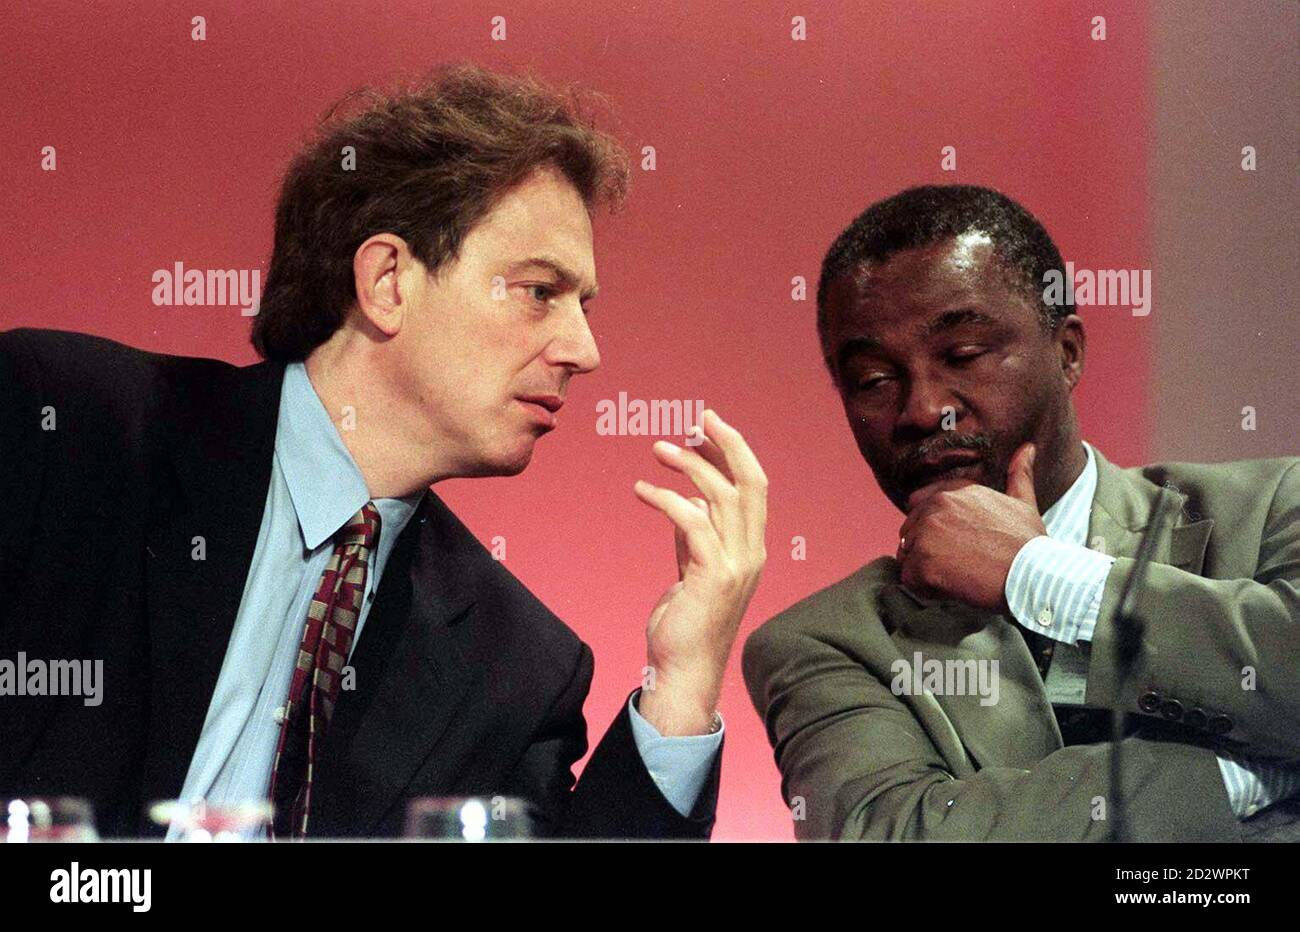 Labour leader Tony Blair talks with South African vice-president Thabo Mbeki at the party conference in Brighton today (Thursday). Stock Photo